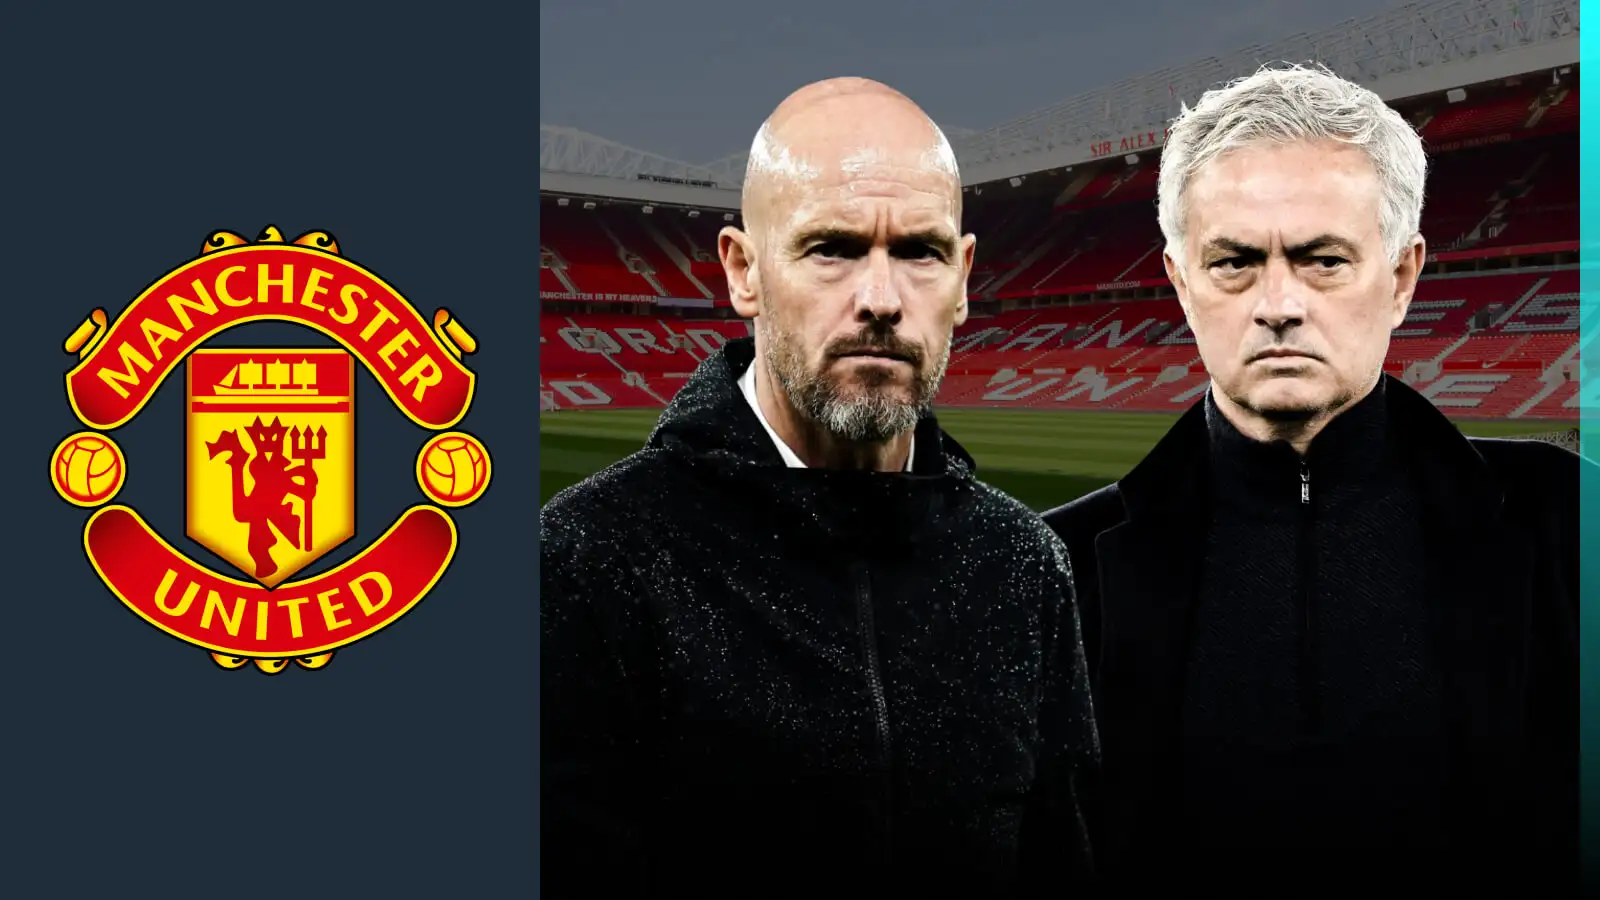 Erik 10 Hag and also Jose Mourinho by means of the Manchester Joined badge